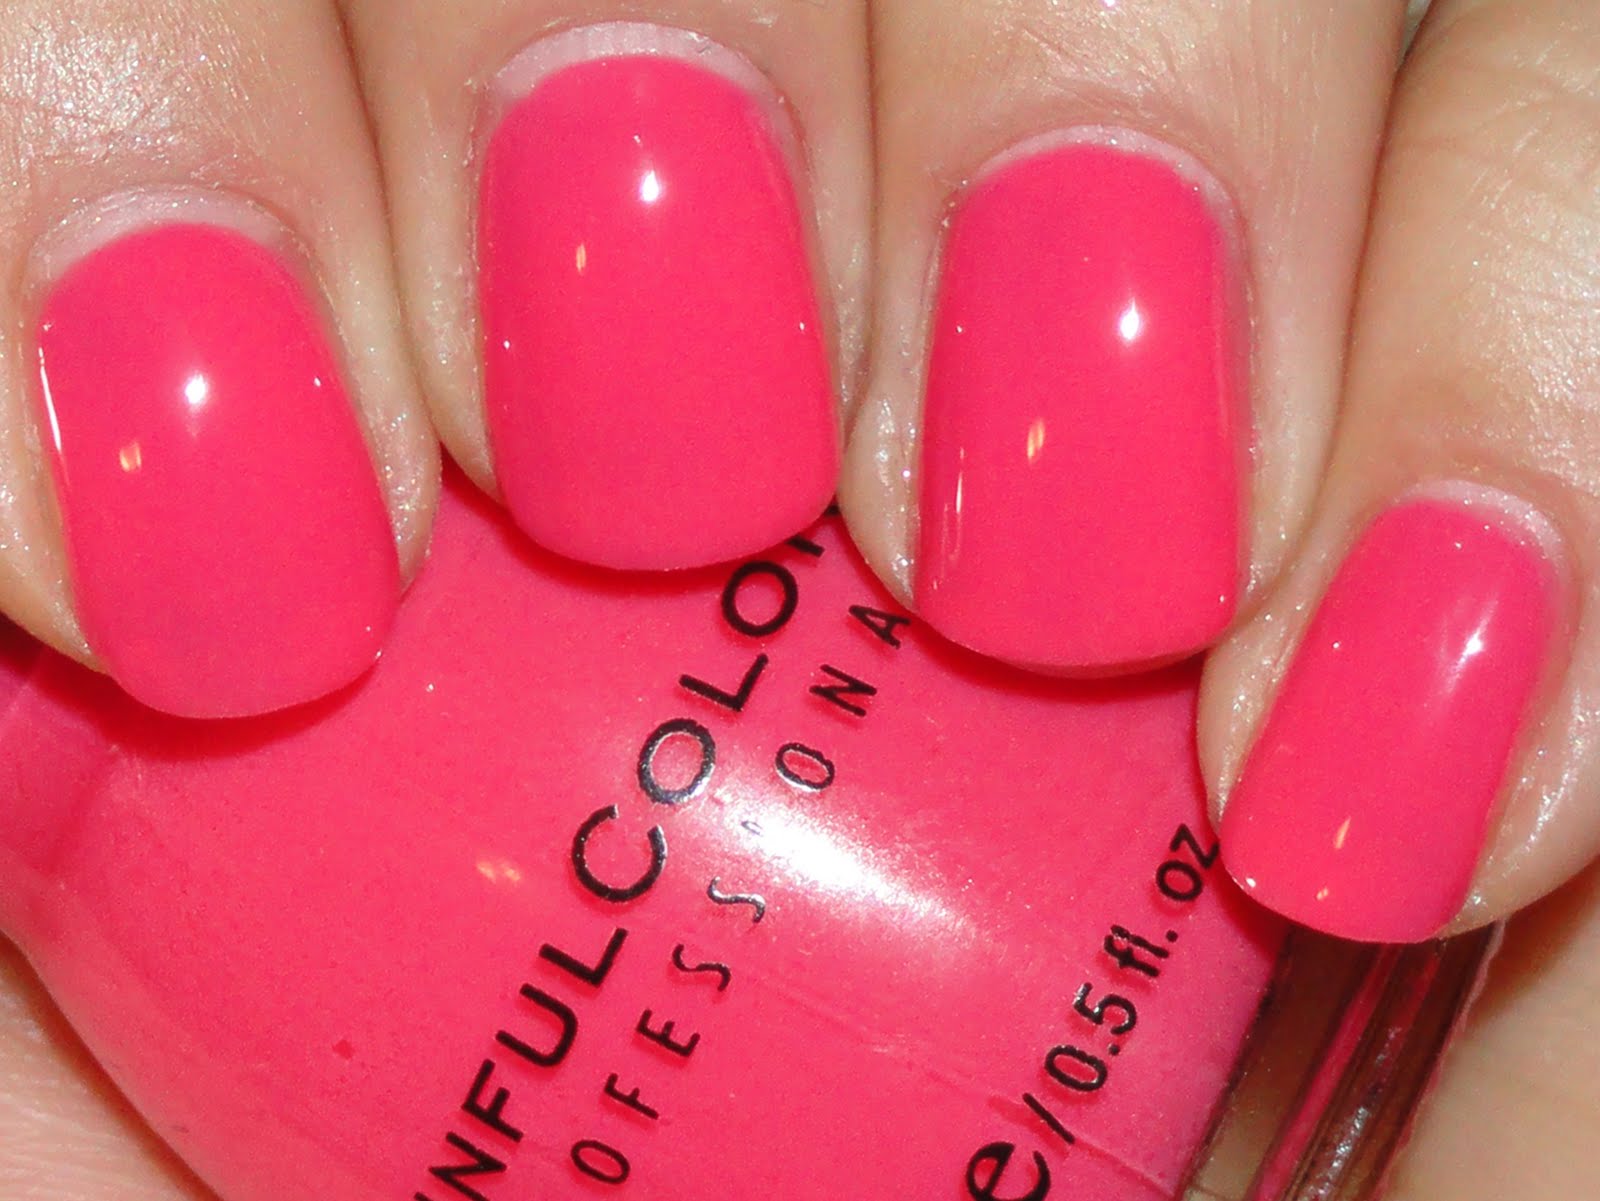 8. Sinful Colors Professional Nail Polish - Pinks and Pearls - wide 2